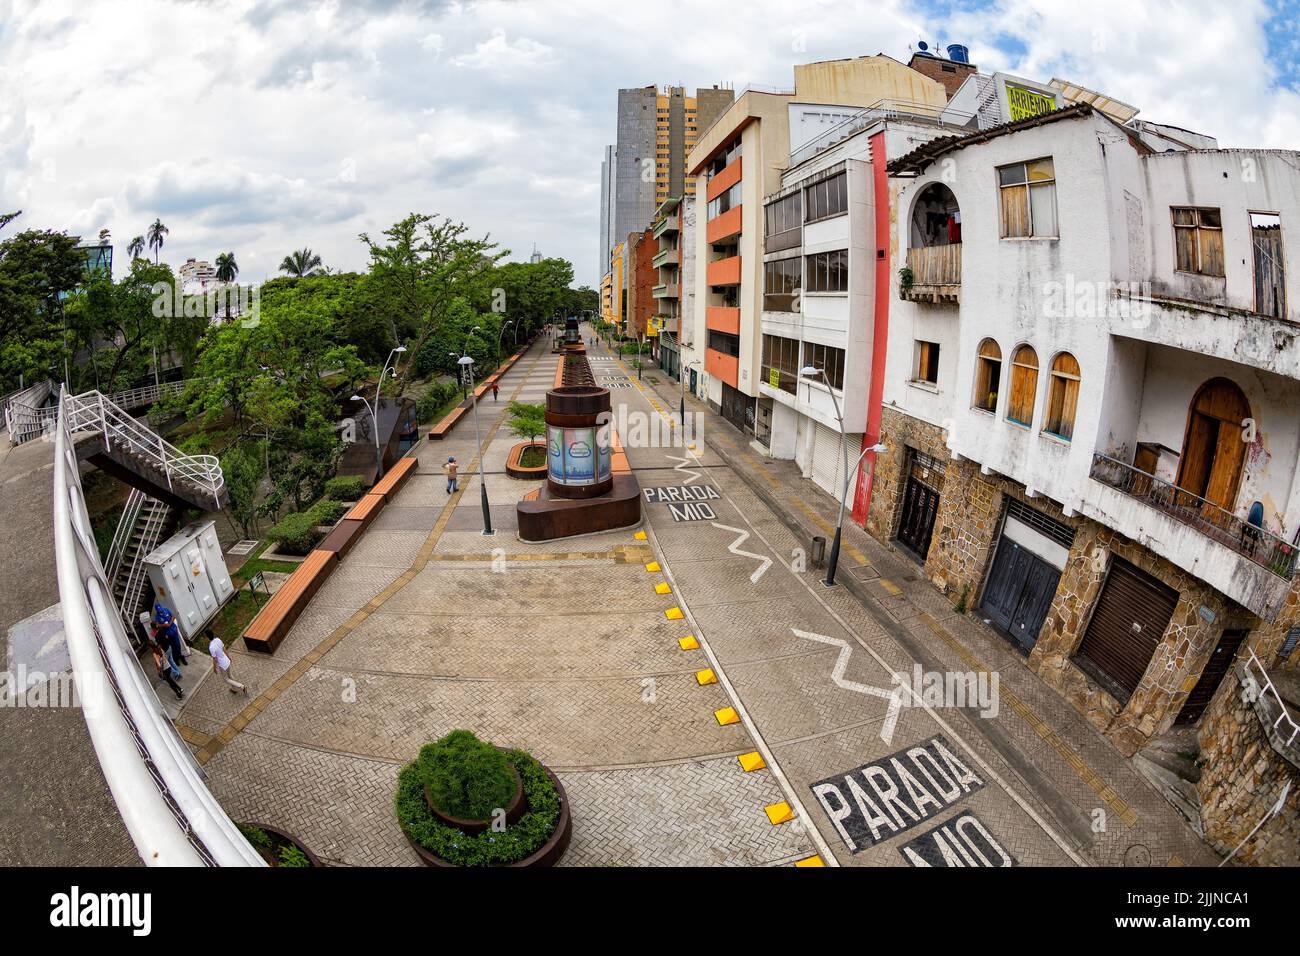 The Fisheye view of a bus lane in Cali, Colombia Stock Photo